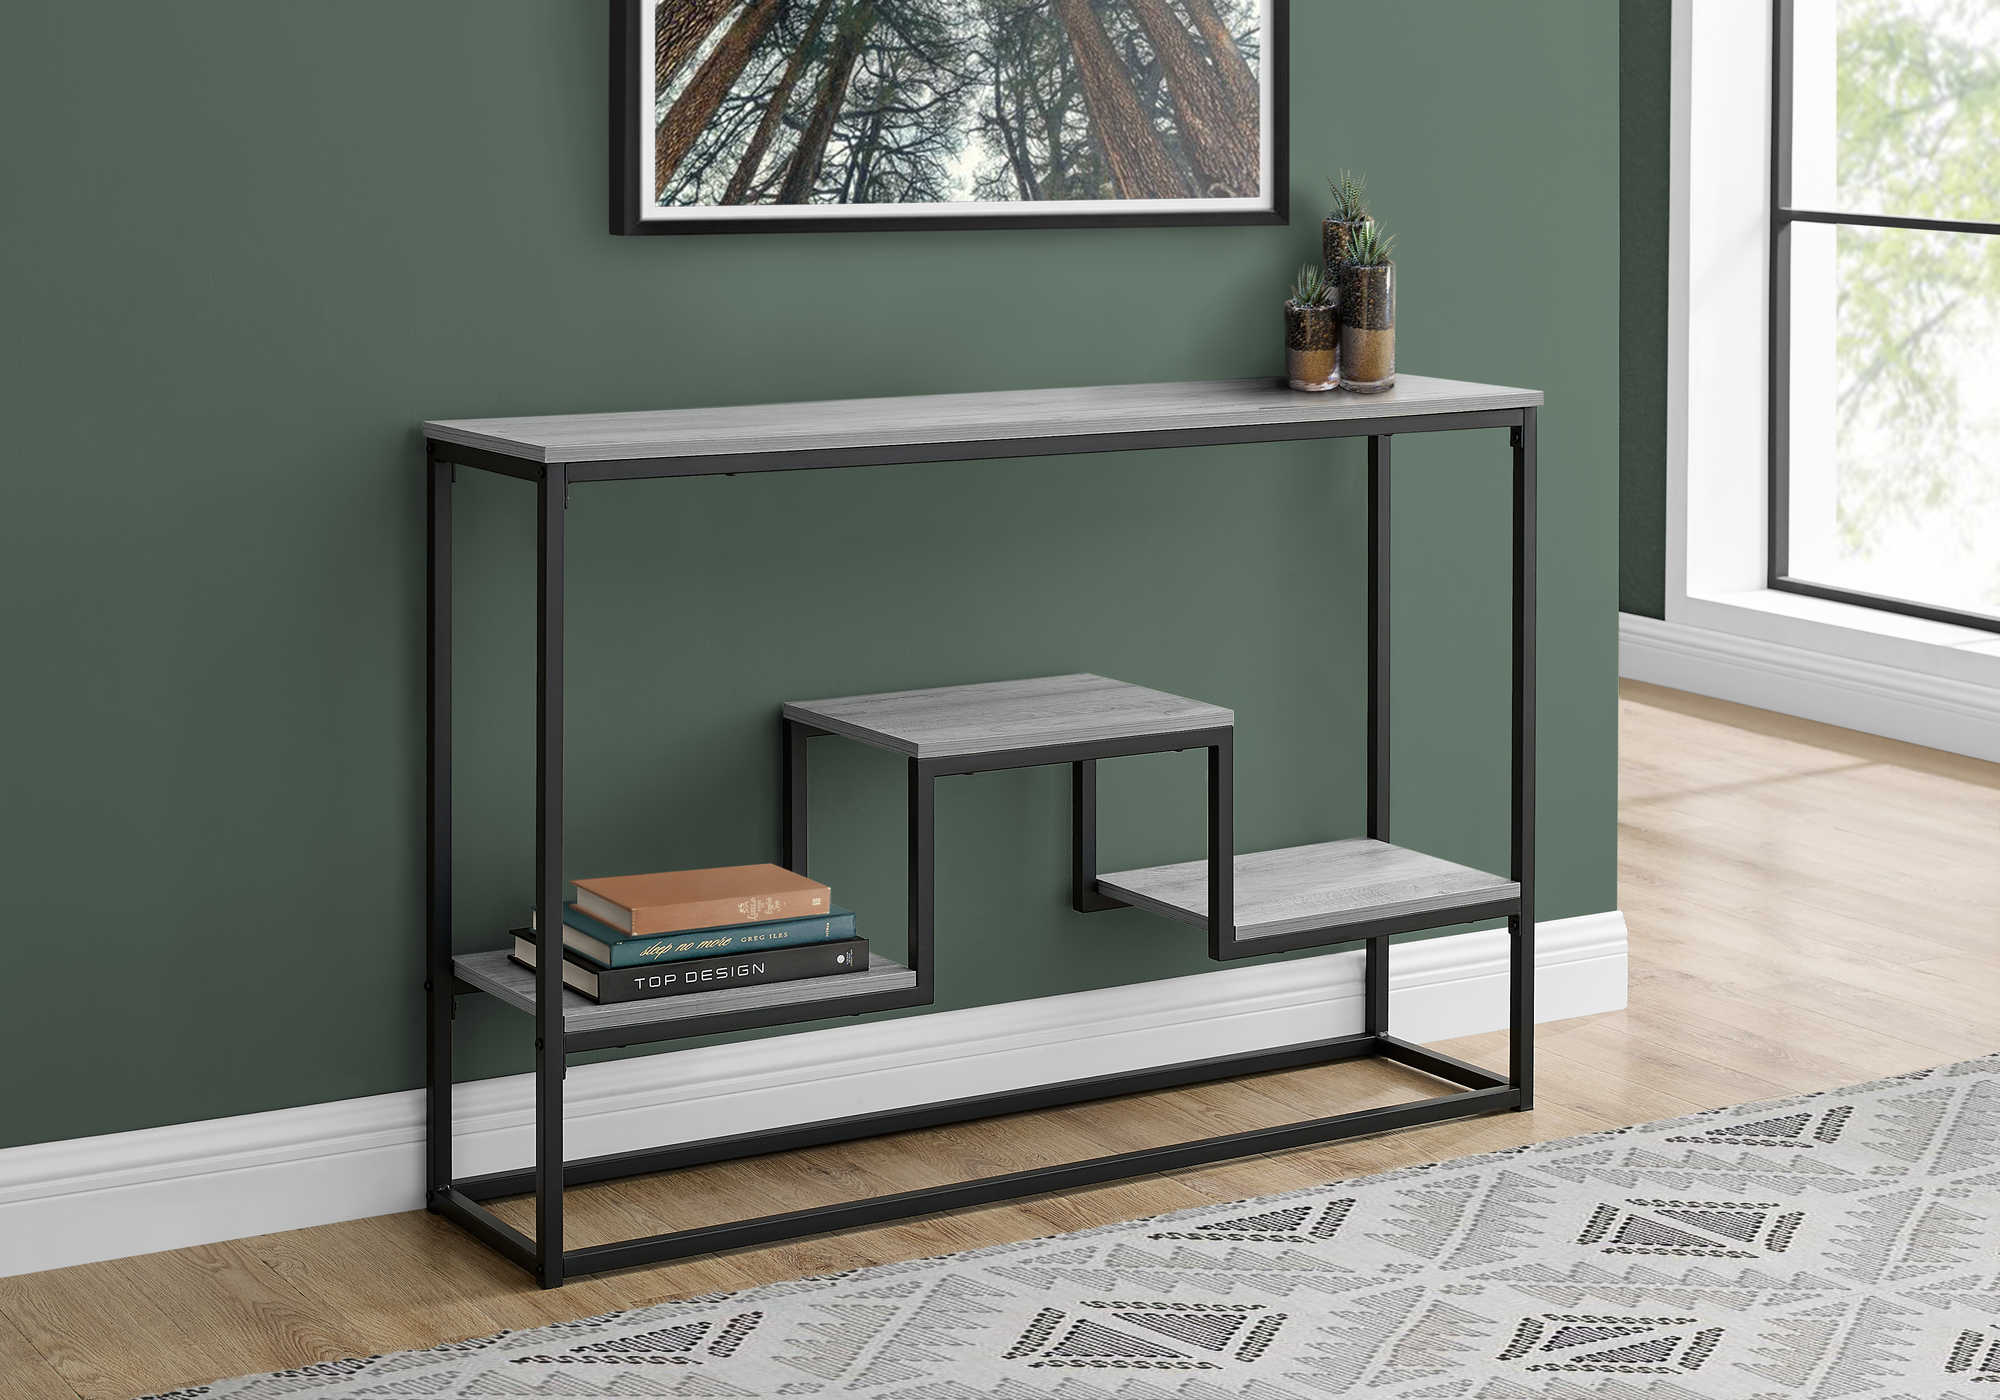 ACCENT TABLE - 48"L / GREY / BLACK METAL HALL CONSOLE